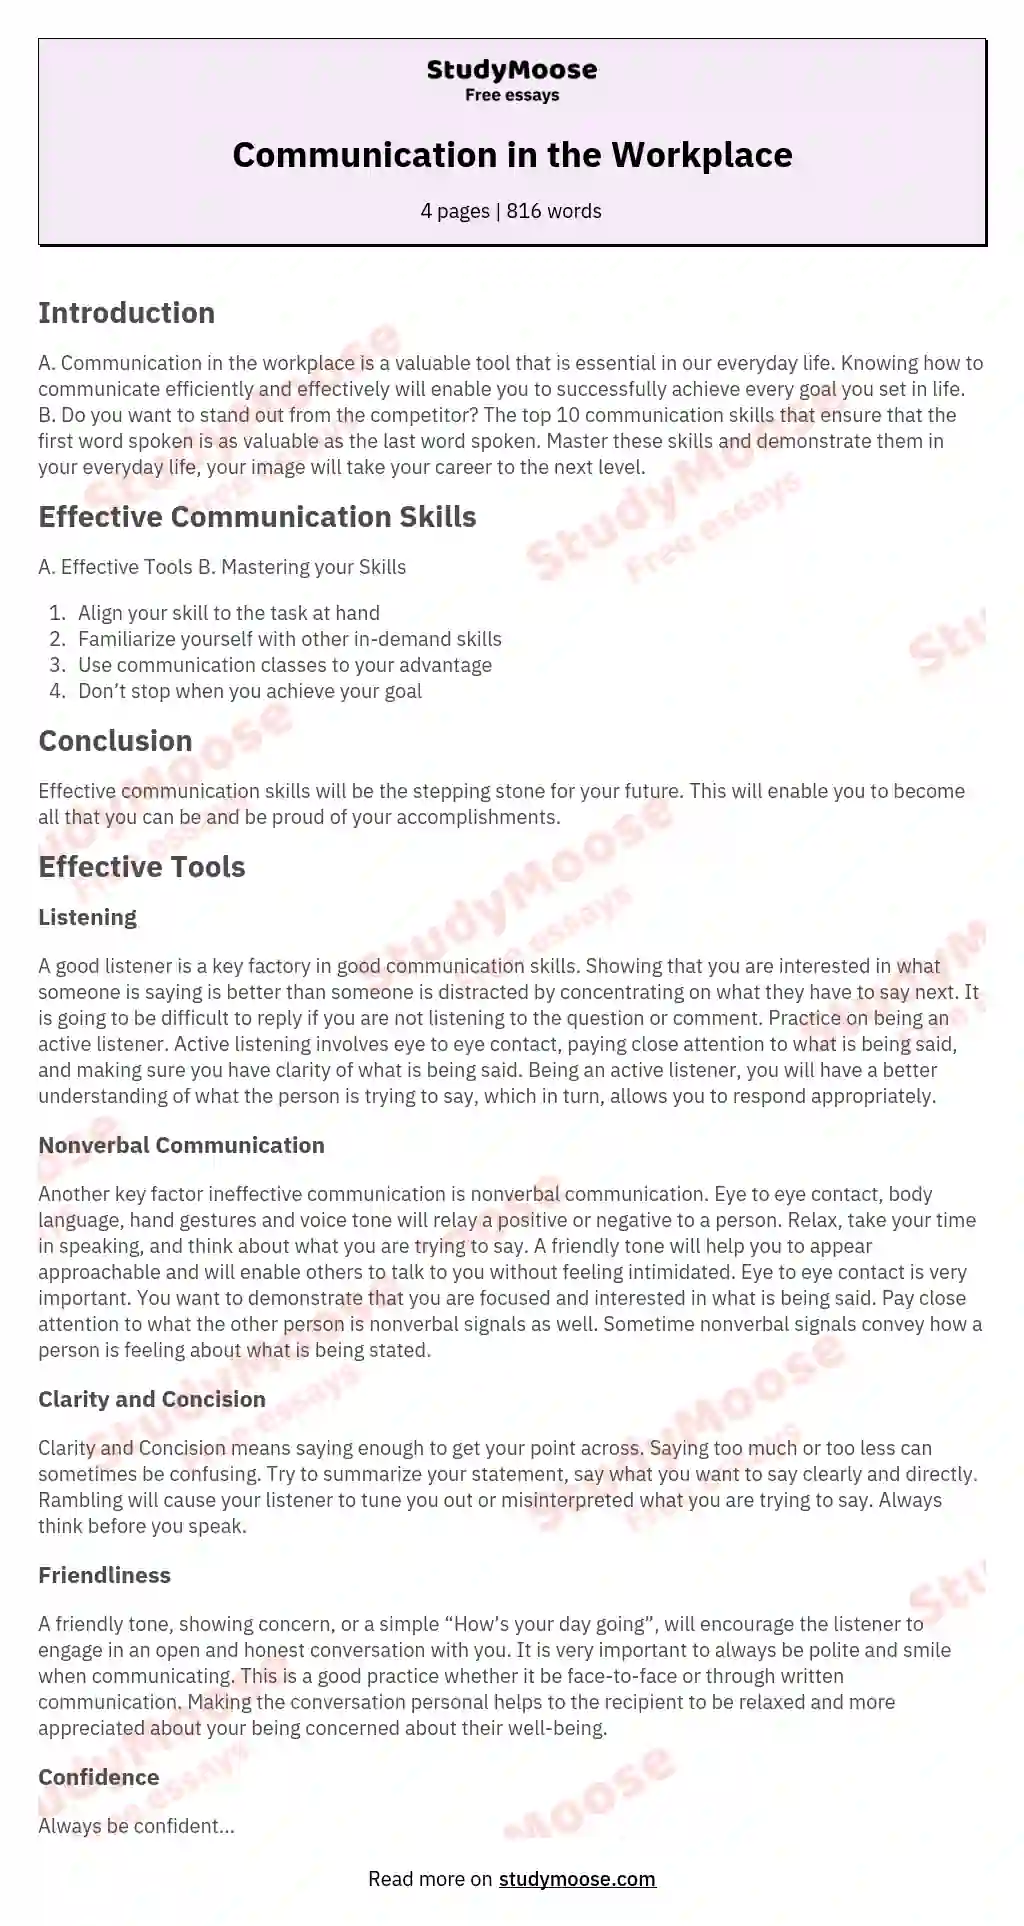 Communication in the Workplace essay